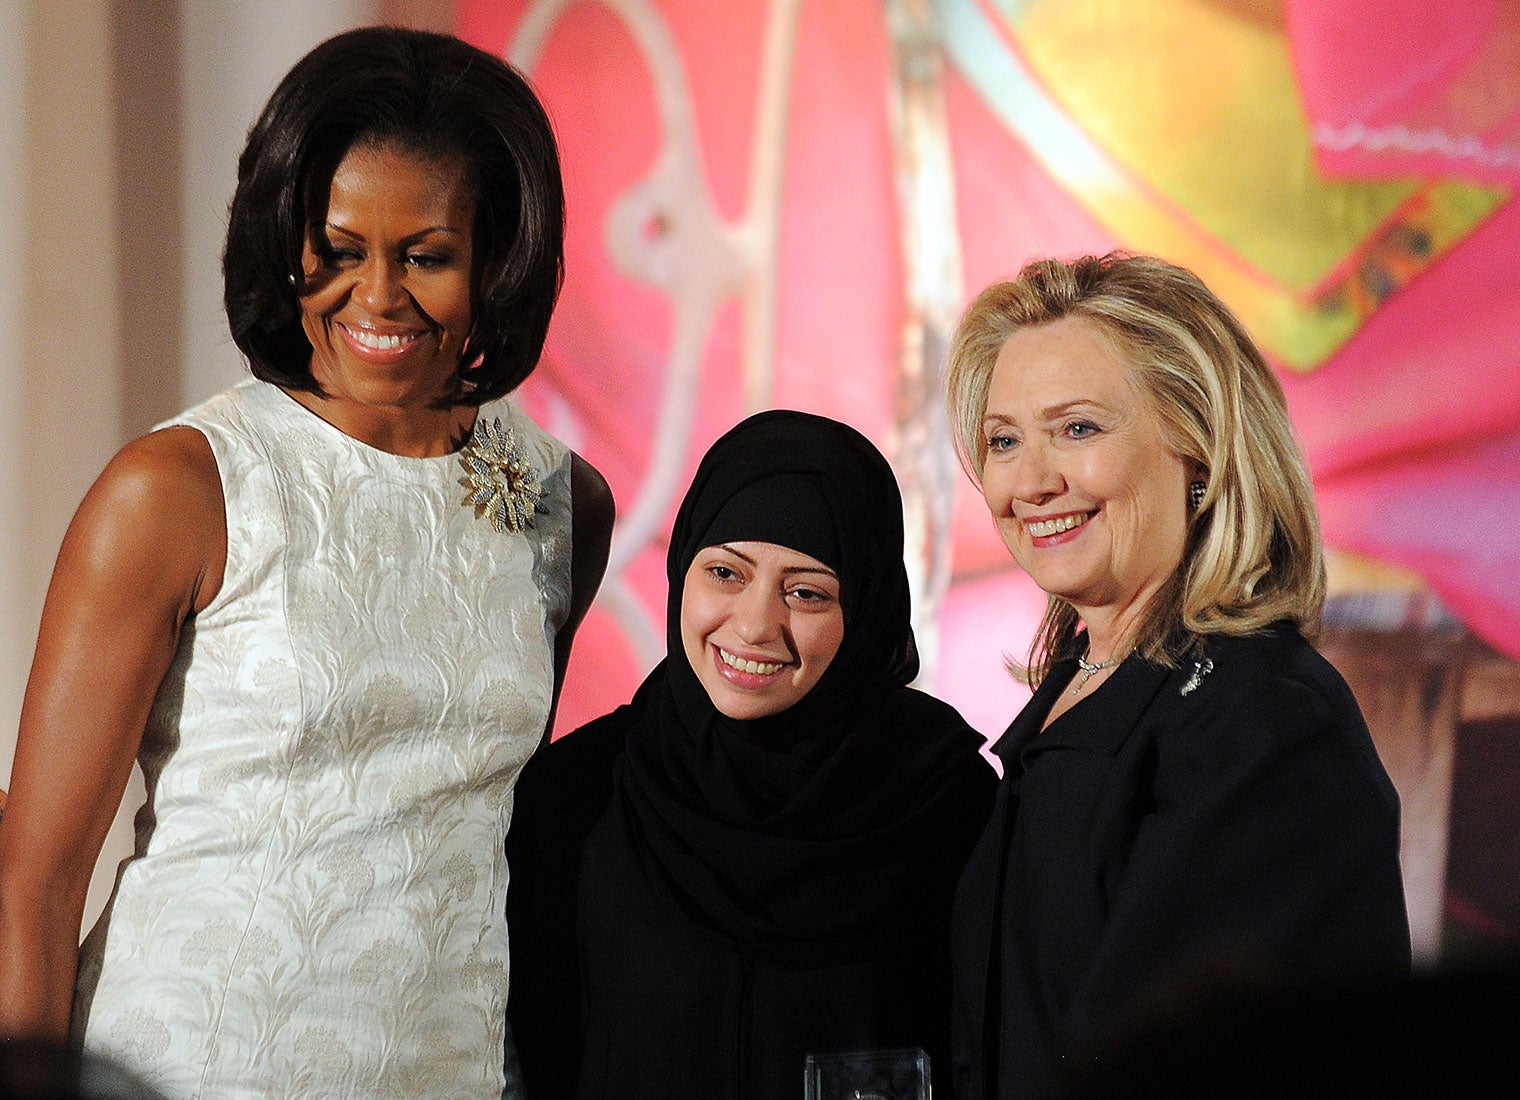 Samar Badawi receives the 2012 International Women of Courage Award from Michelle Obama and Hillary Clinton